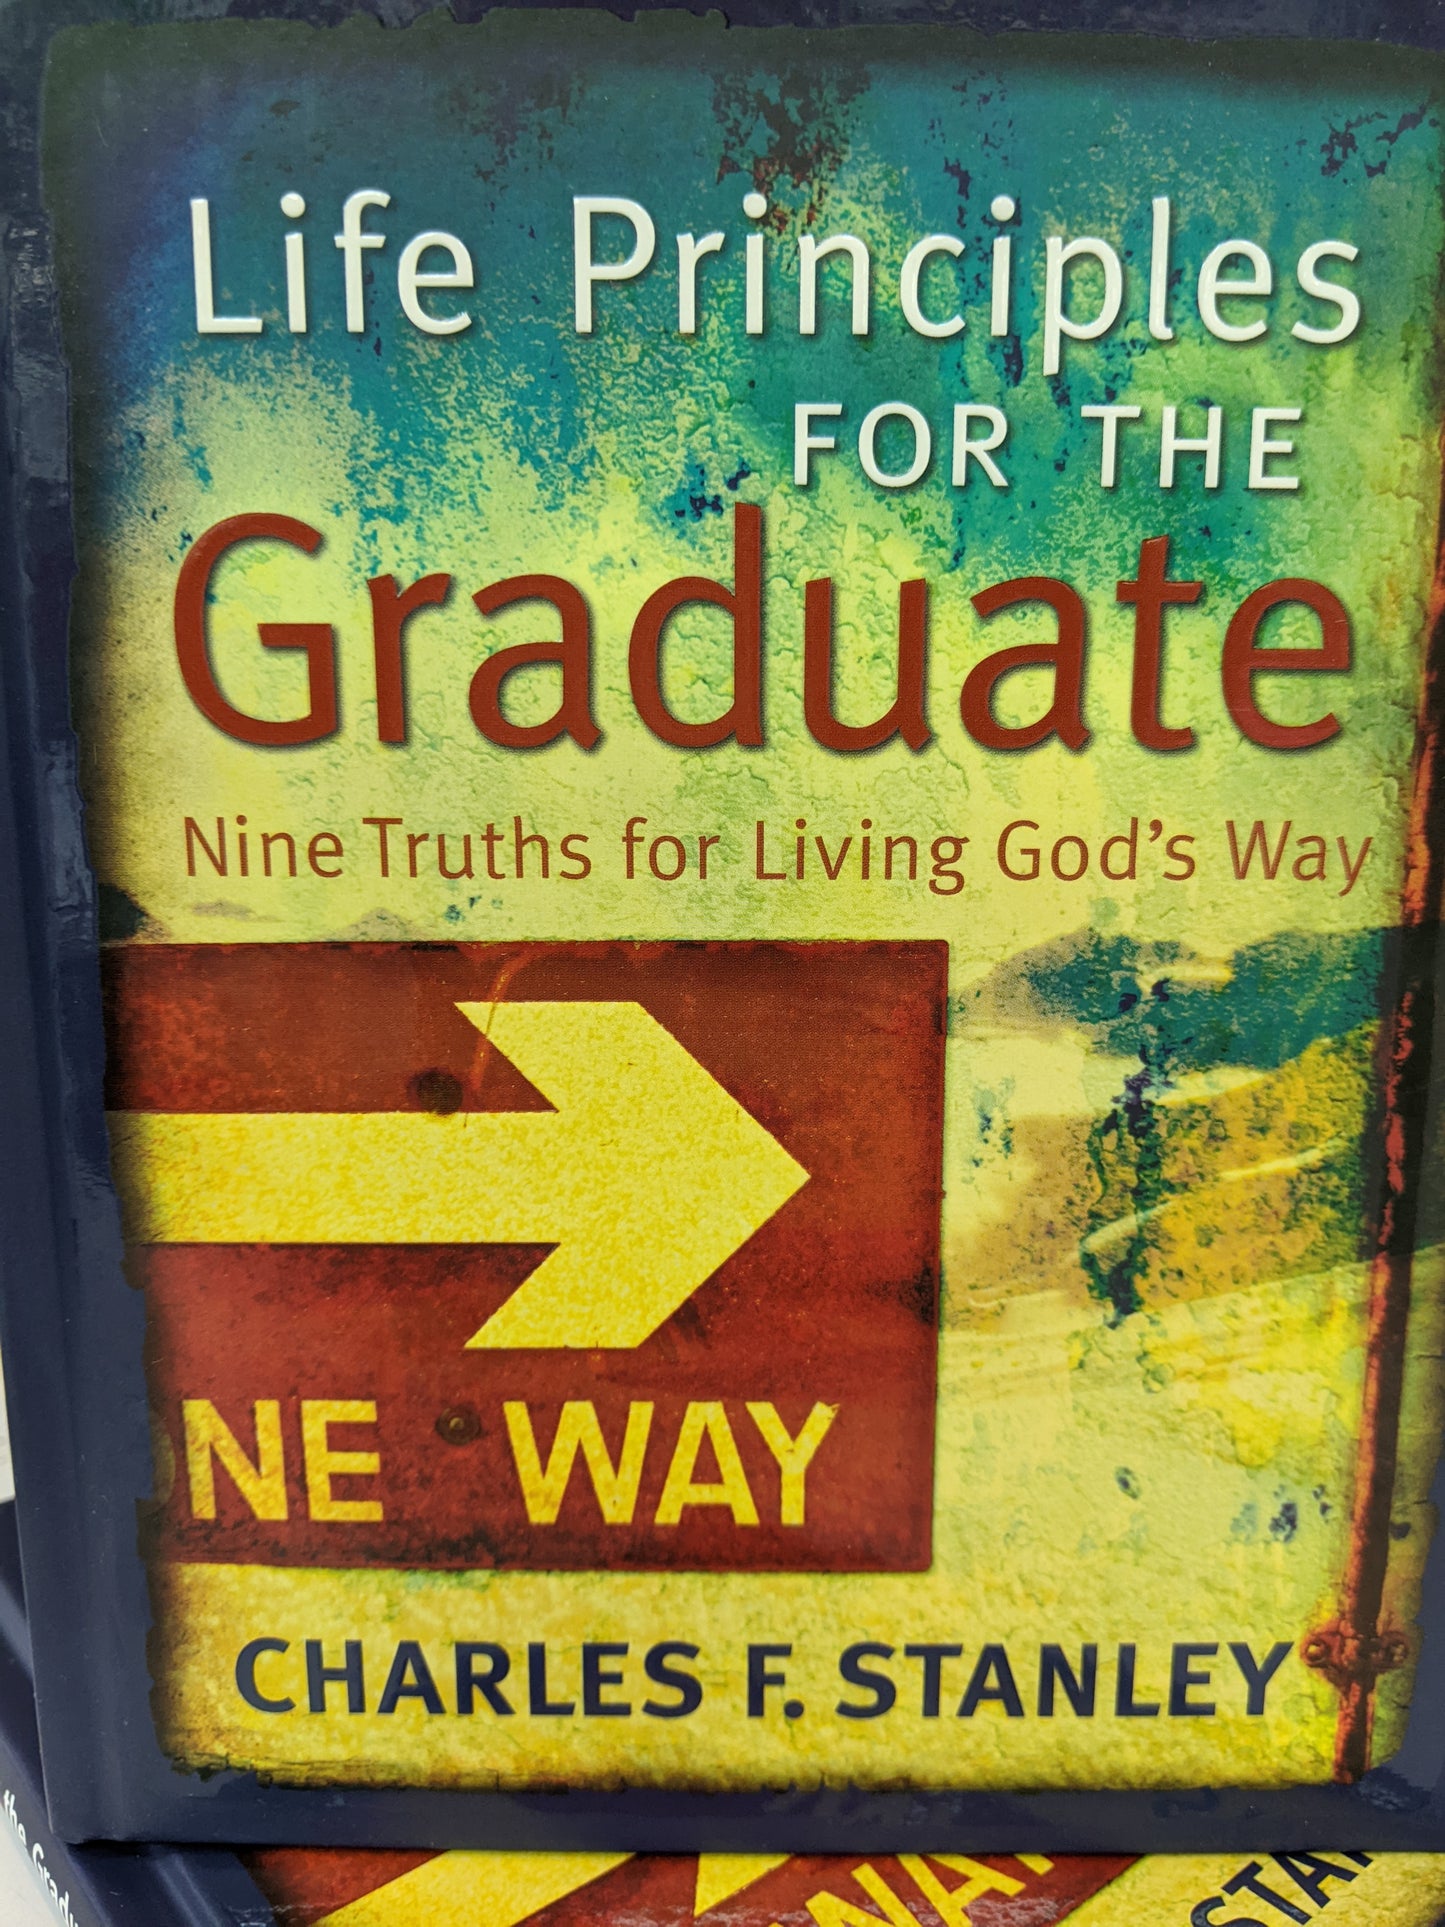 Life Principles For the Graduate